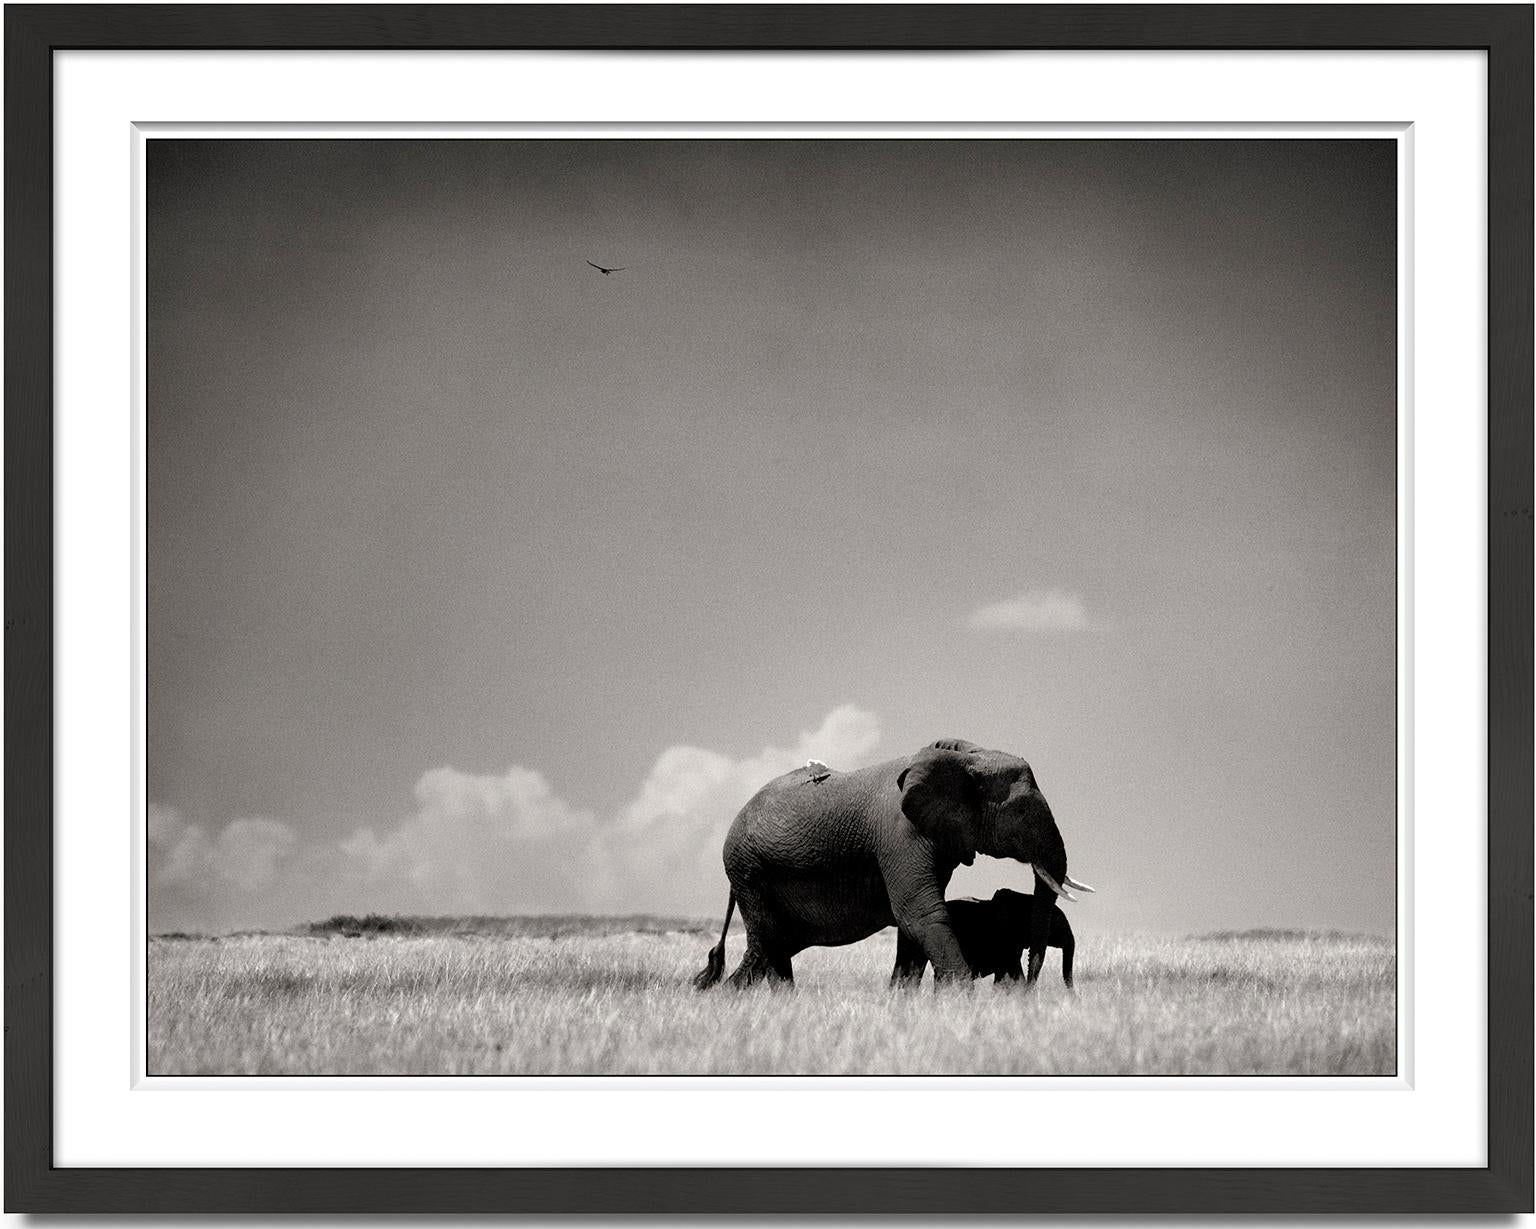 Elephant mother and calf, animal, wildlife, black and white photography, africa - Photograph by Joachim Schmeisser